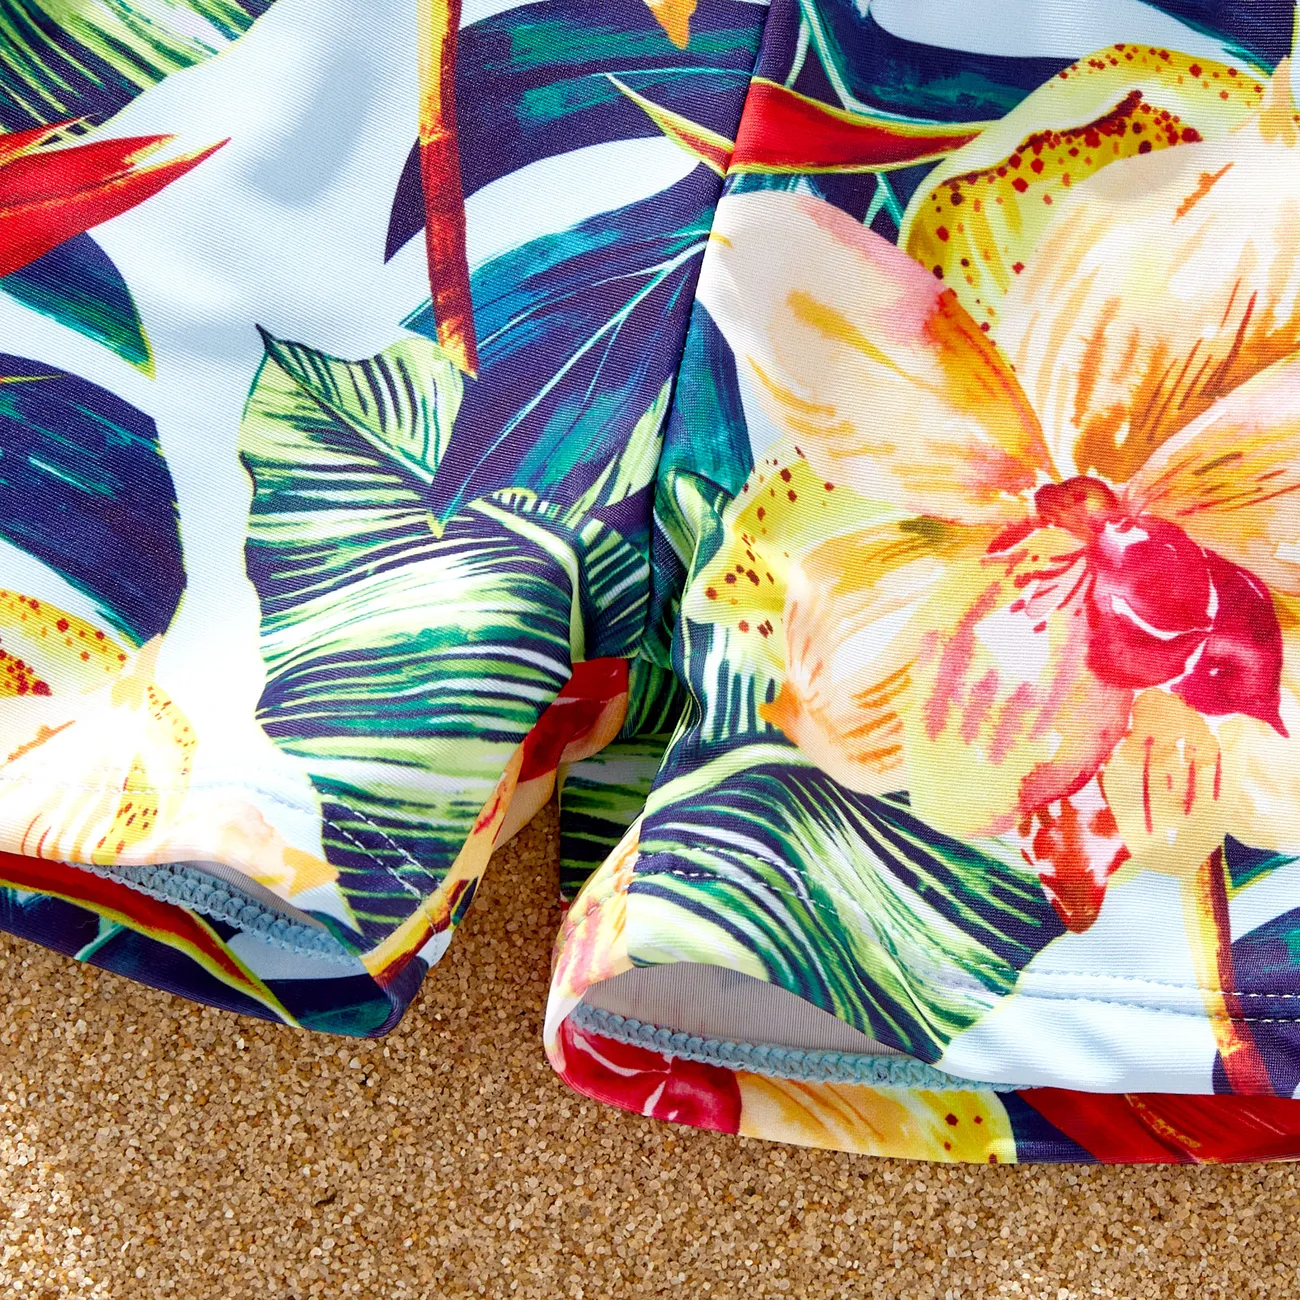 Family Matching Floral Drawstring Swim Trunks or Ruched Shell Edge Bikini with Optional Swim Cover Up Red big image 1